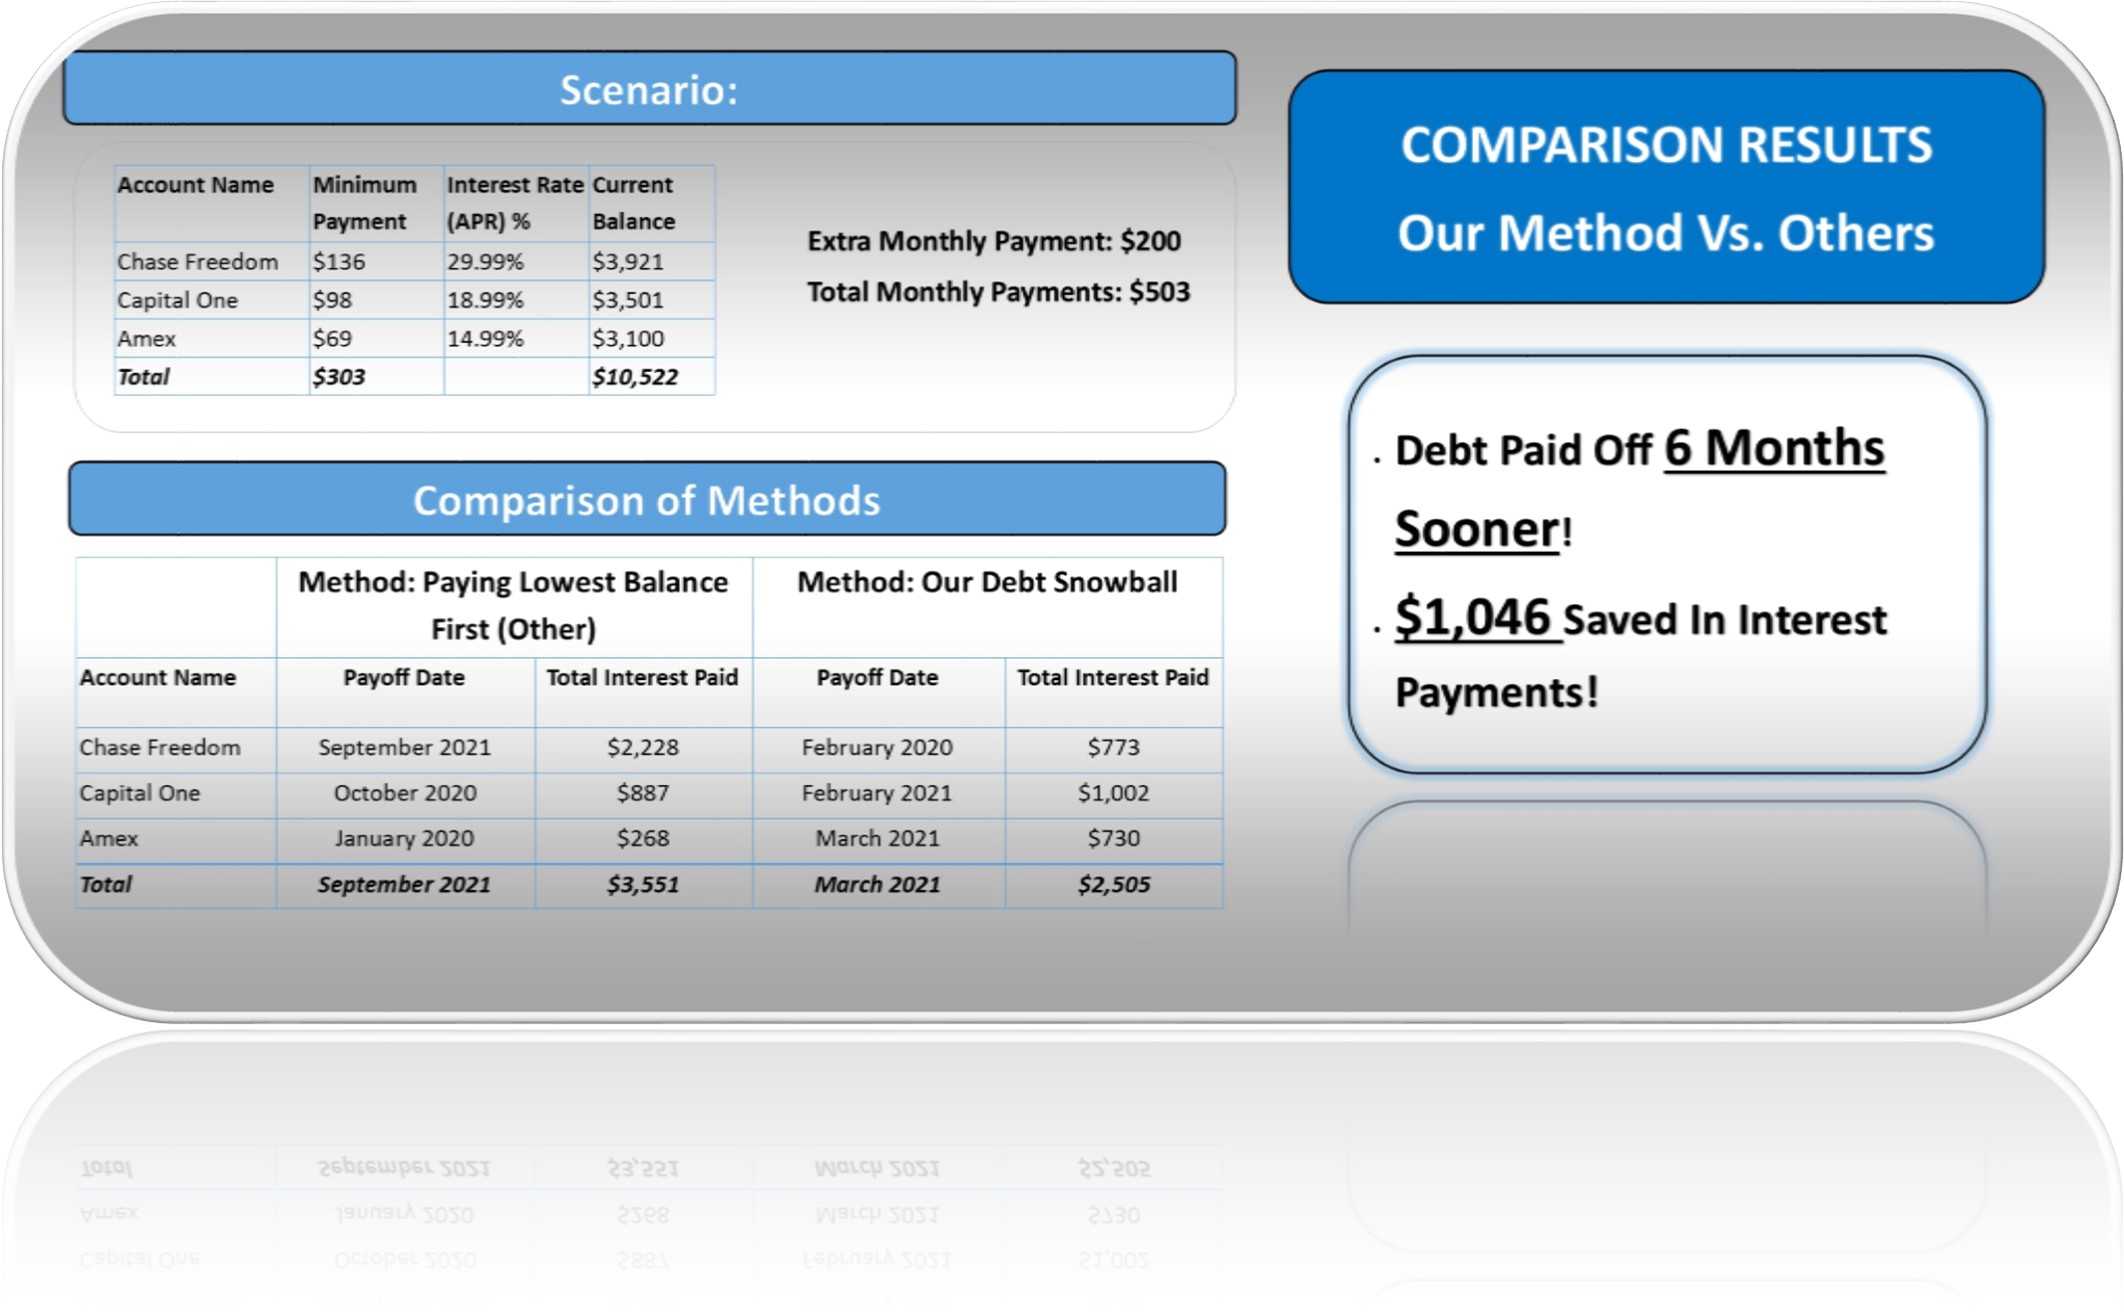 Credit Card Payoff Preadsheet Debt Nowball Calculator Excel With Regard To Credit Card Interest Calculator Excel Template